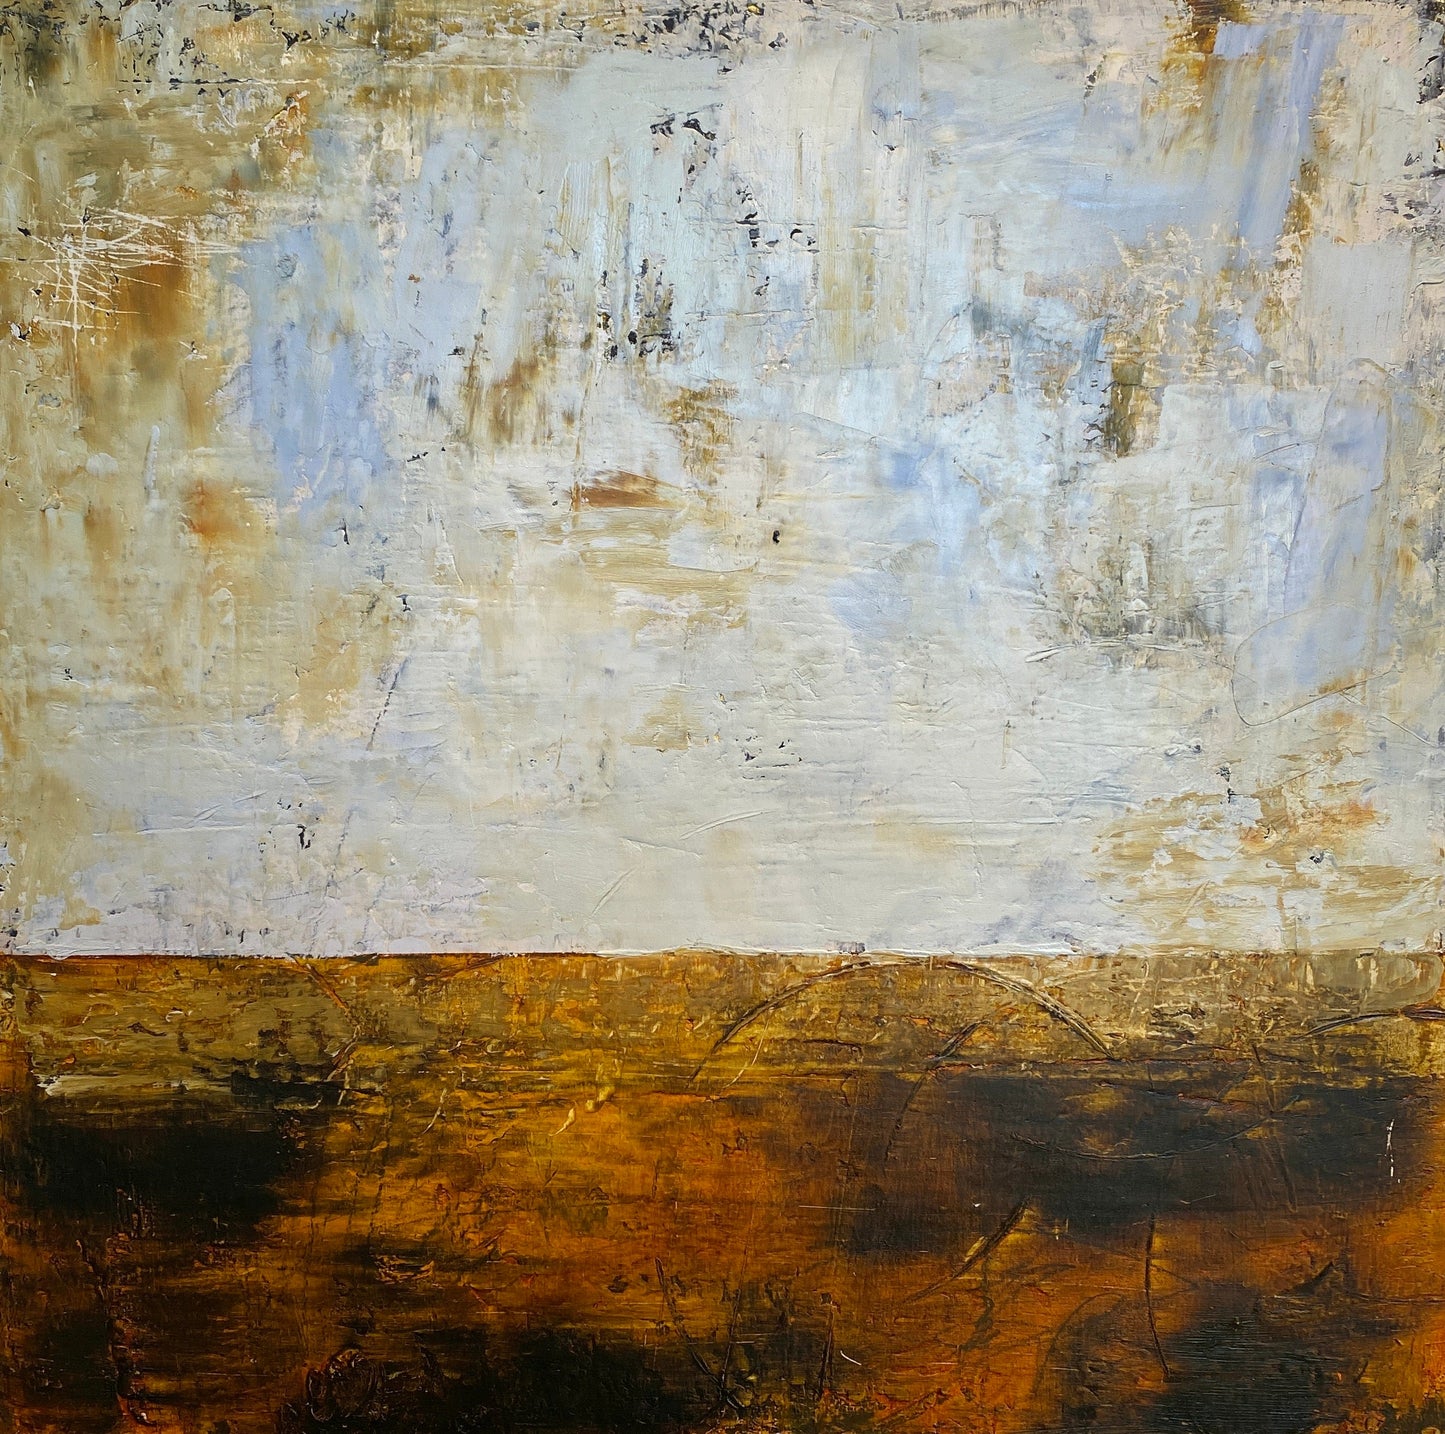 Land & Sky, Oil and Cold Wax